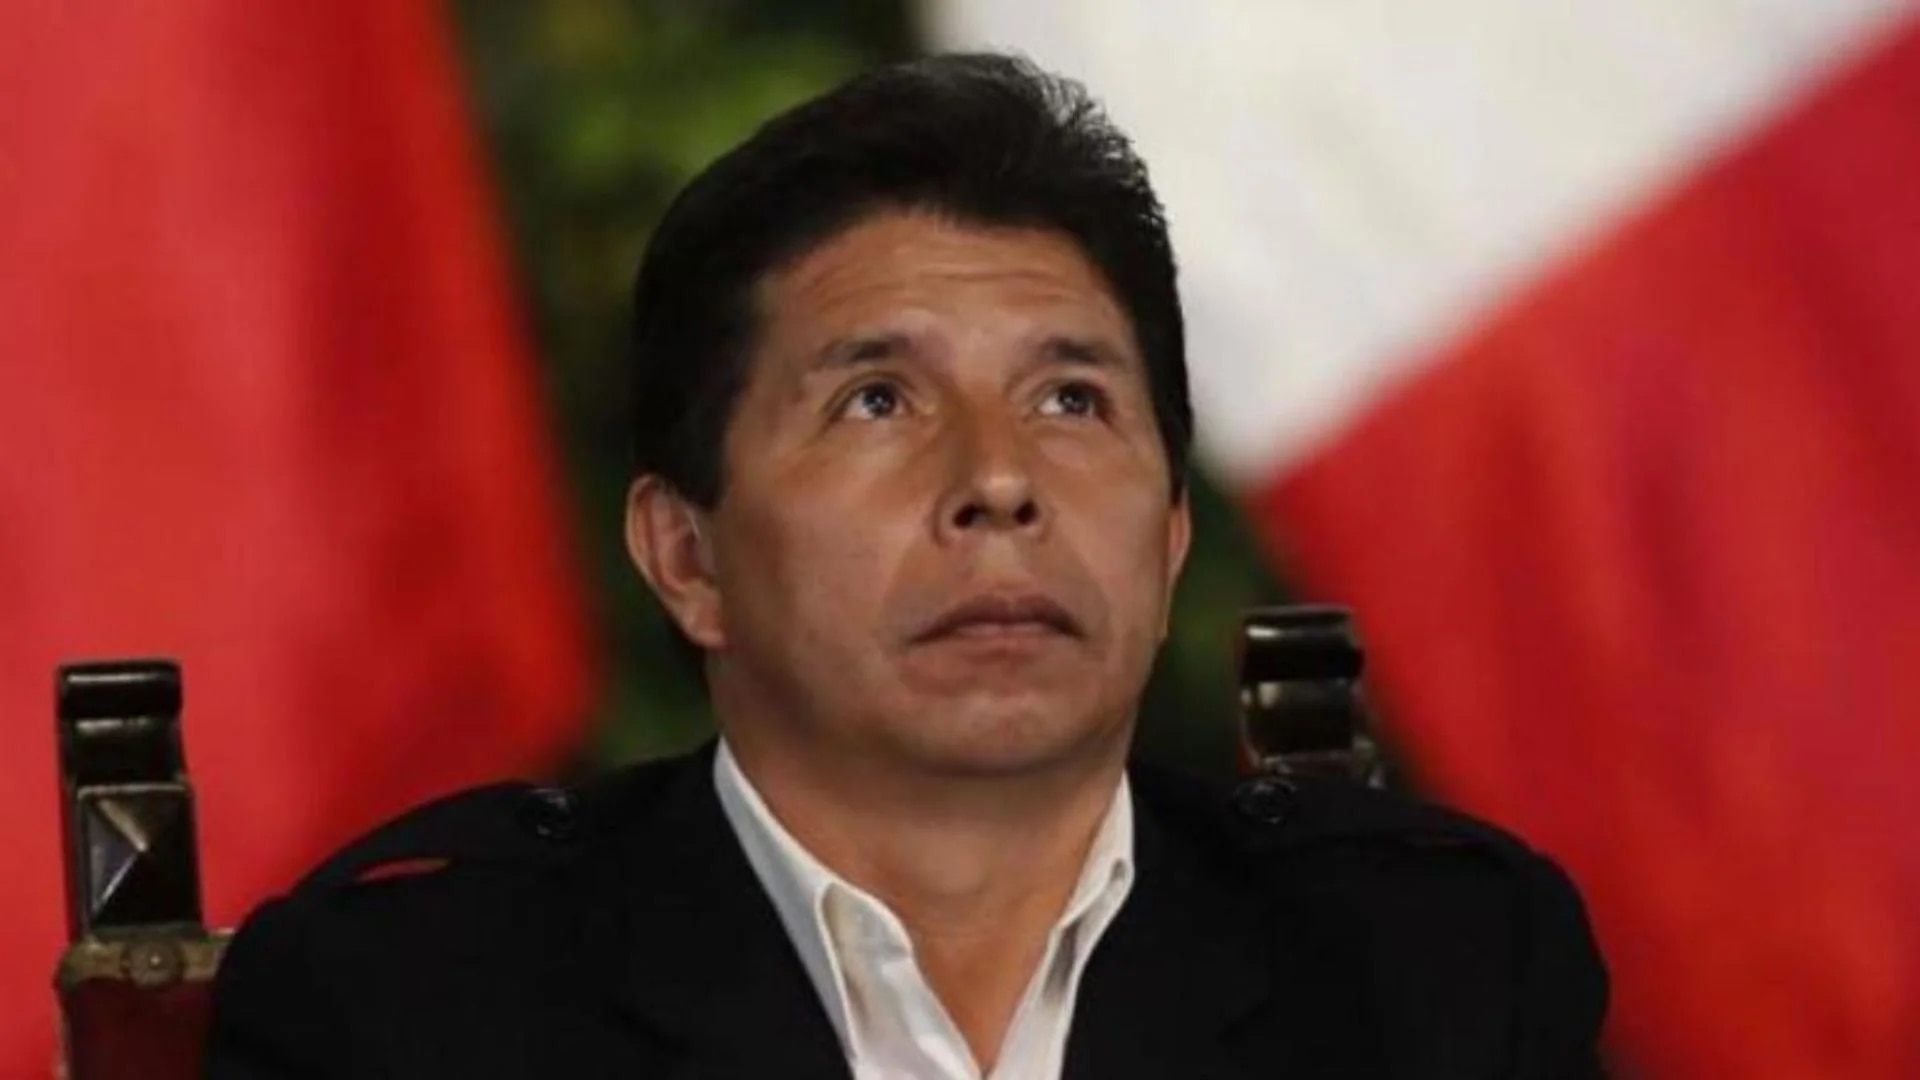 Presidential candidate of Peru Libre is being held together with former head of state Alejandro Toledo.  |  Presidency